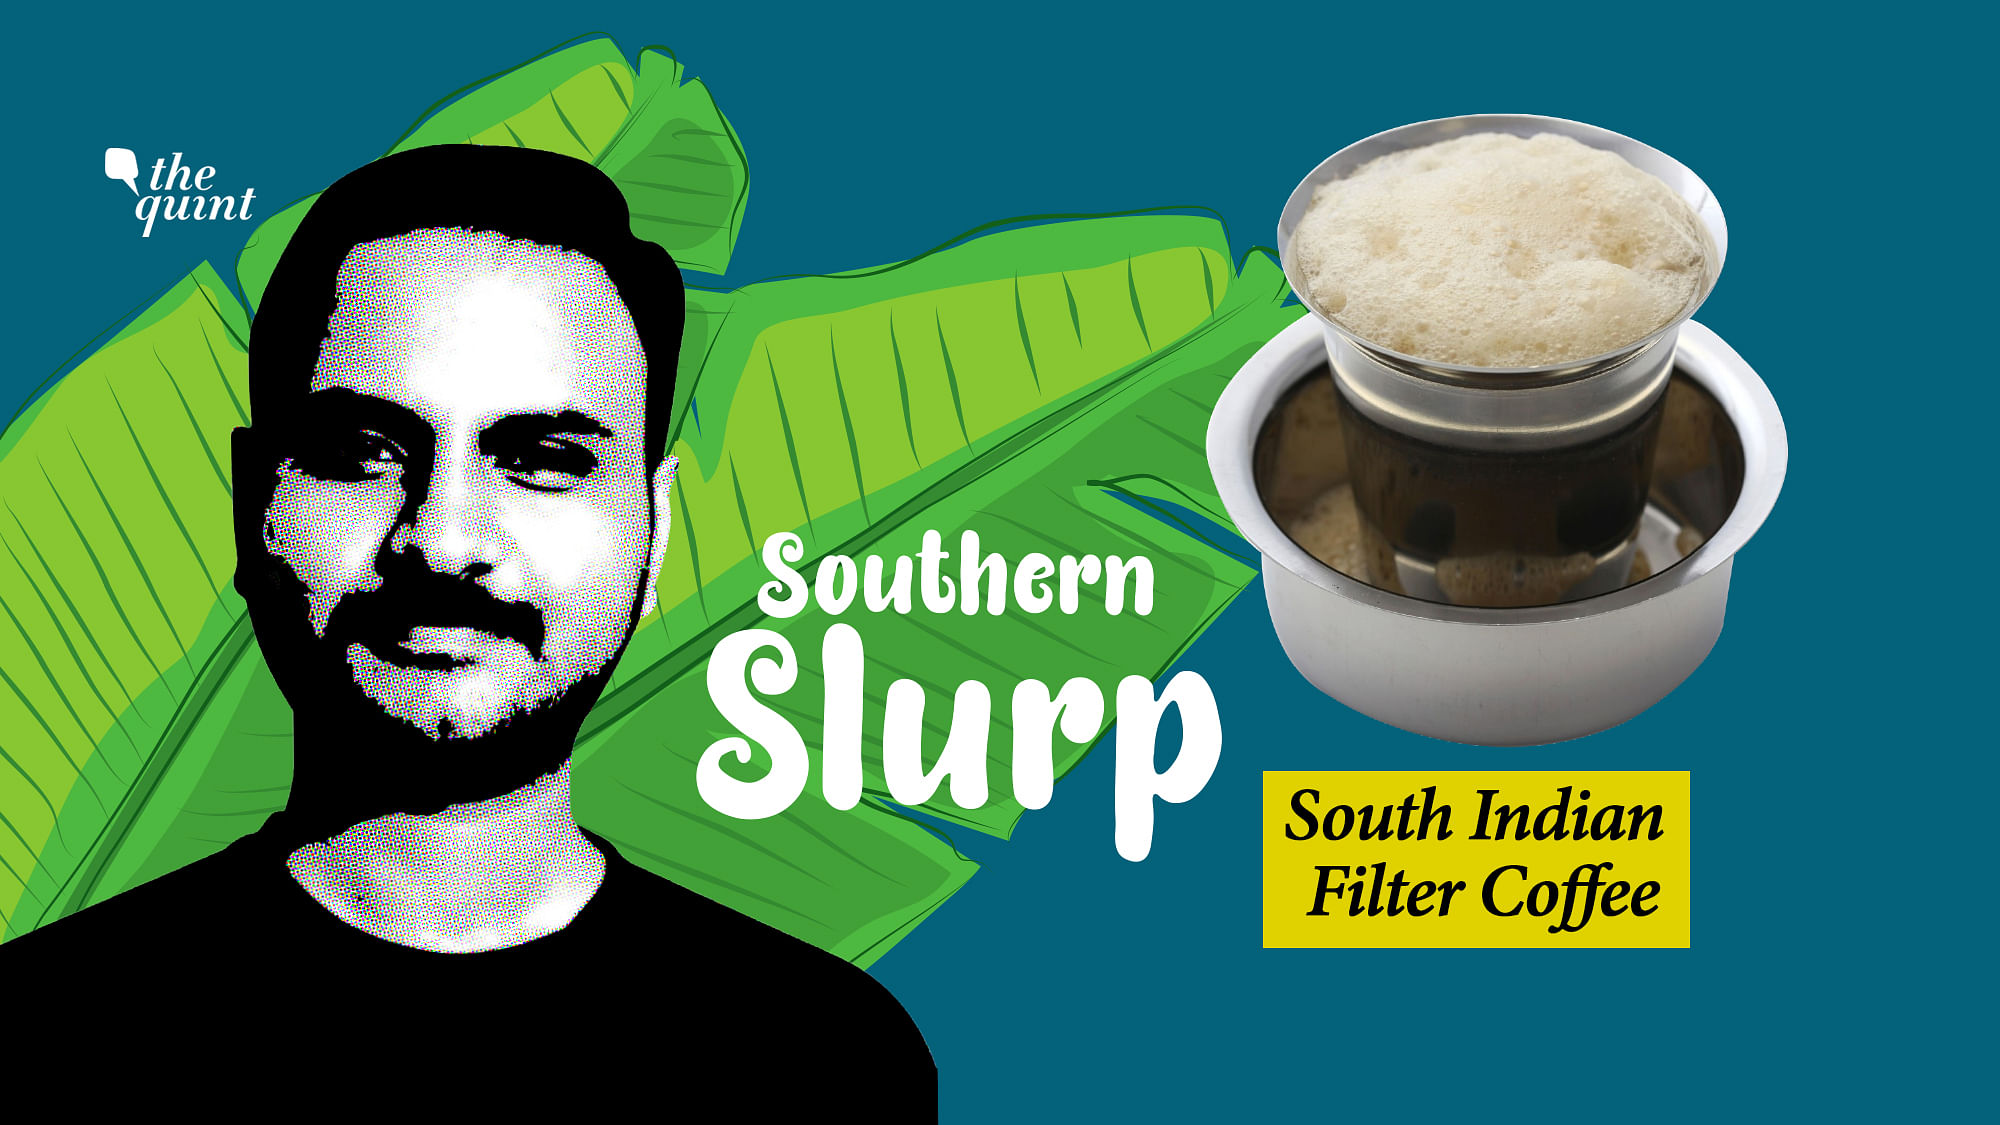 The Madras Coffee, also known as the Mylapore Kaapi, more widely known as the South Indian Filter Coffee, is probably the most recent addition to the culture of South Indian cuisine. &nbsp;